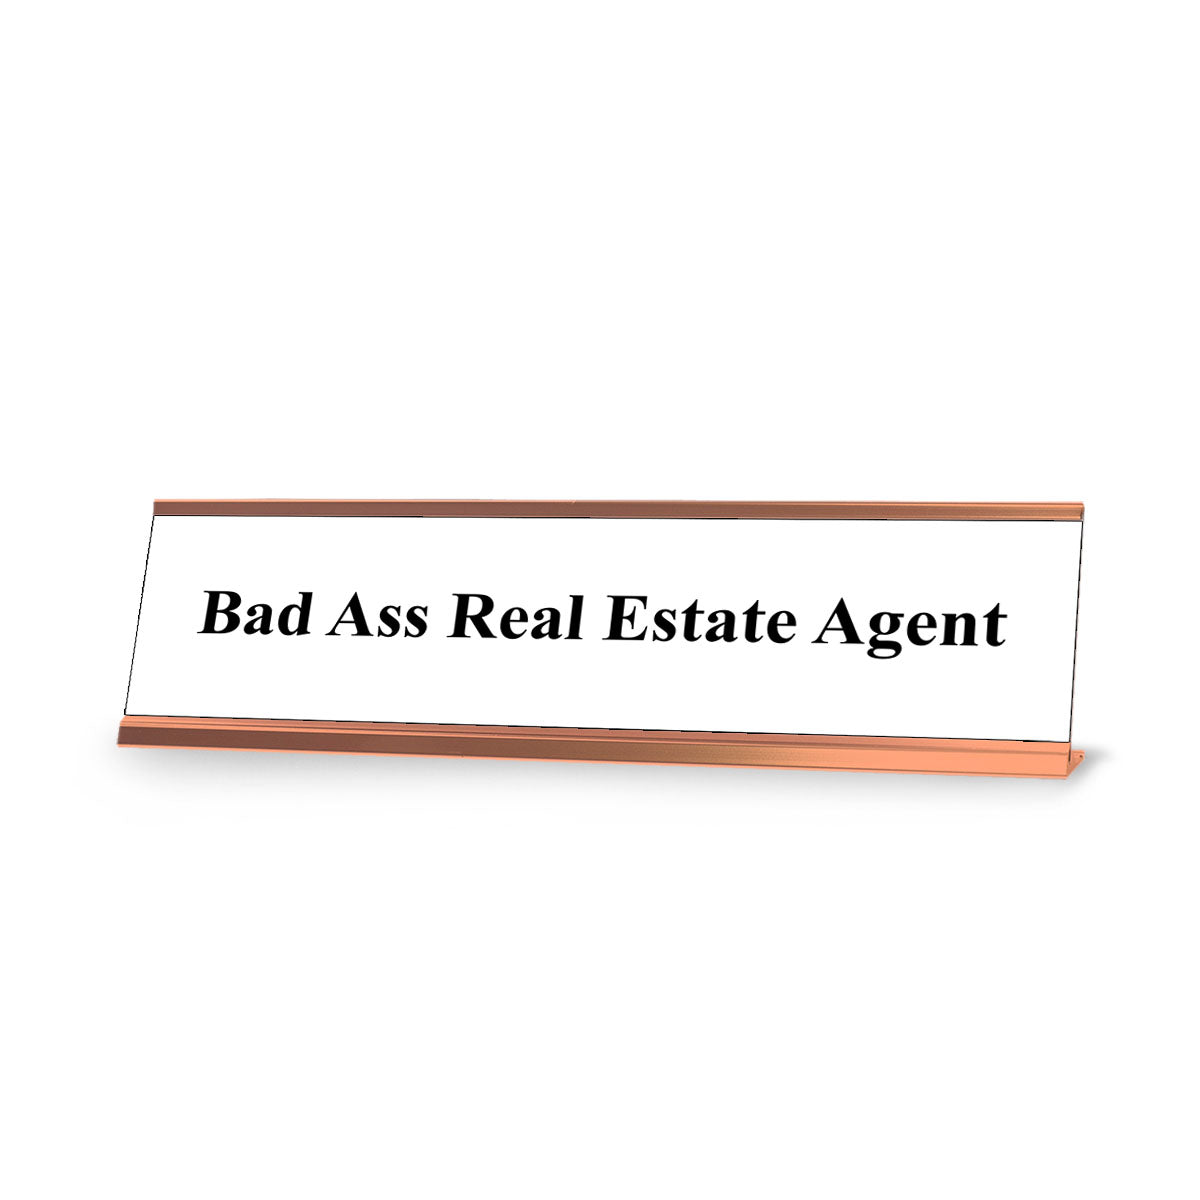 Bad Ass Real Estate Agent, White and Rose Gold Office Gift Desk Sign (2 x 8")